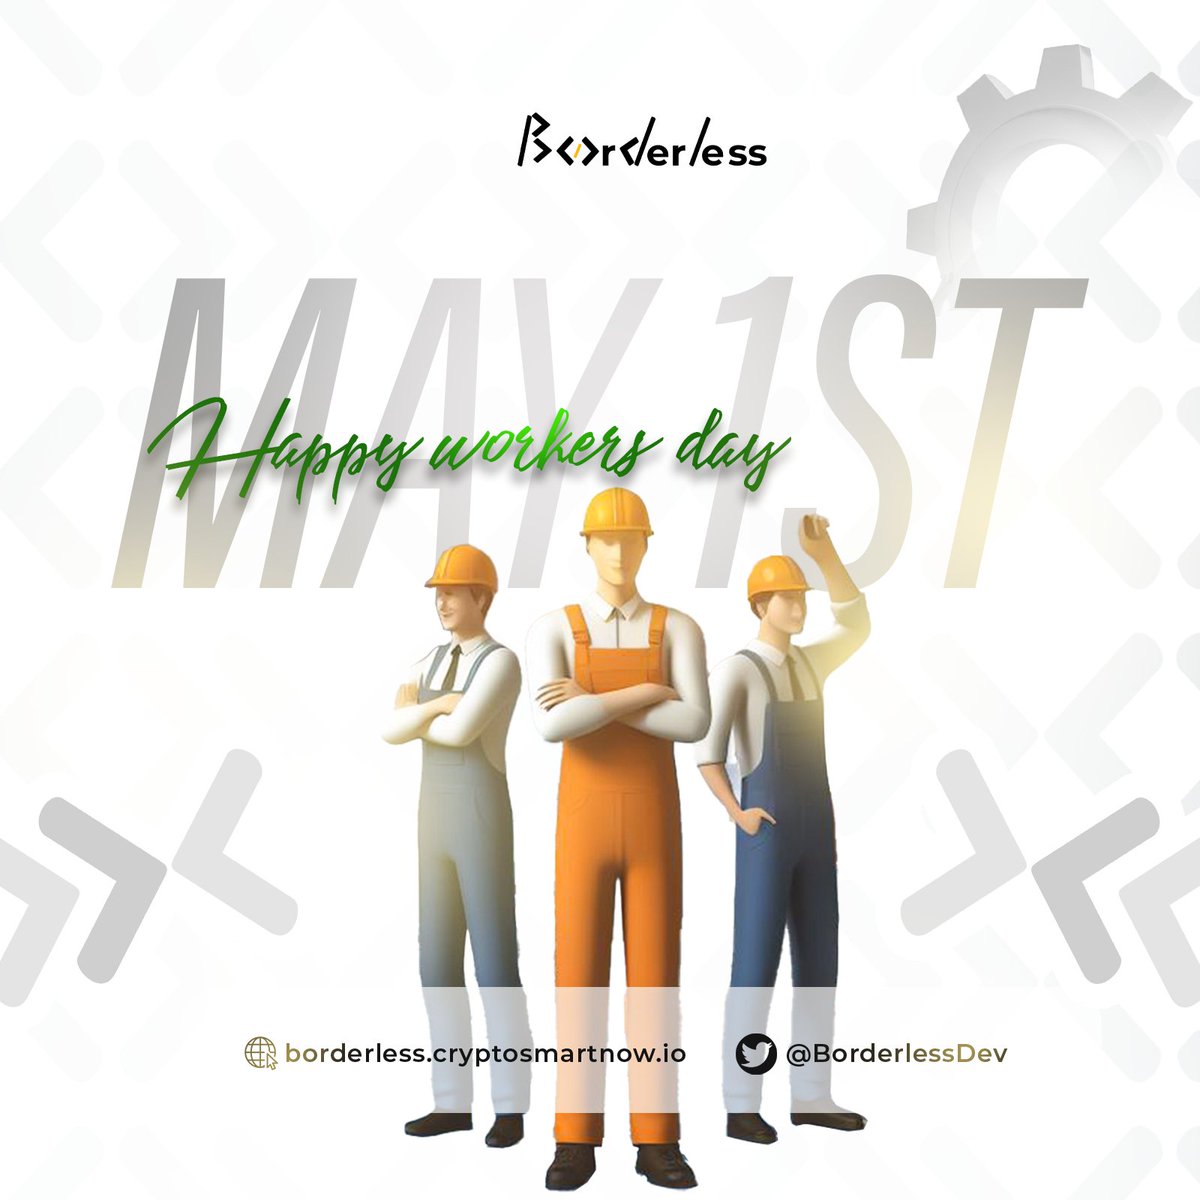 Every year on May 1st, the world comes together to celebrate International Workers' Day, also known as International Labour Day. It's a day dedicated to honouring the contributions of working people in every industry and sector. Happy workers Day to those who work 👨🏽‍💻